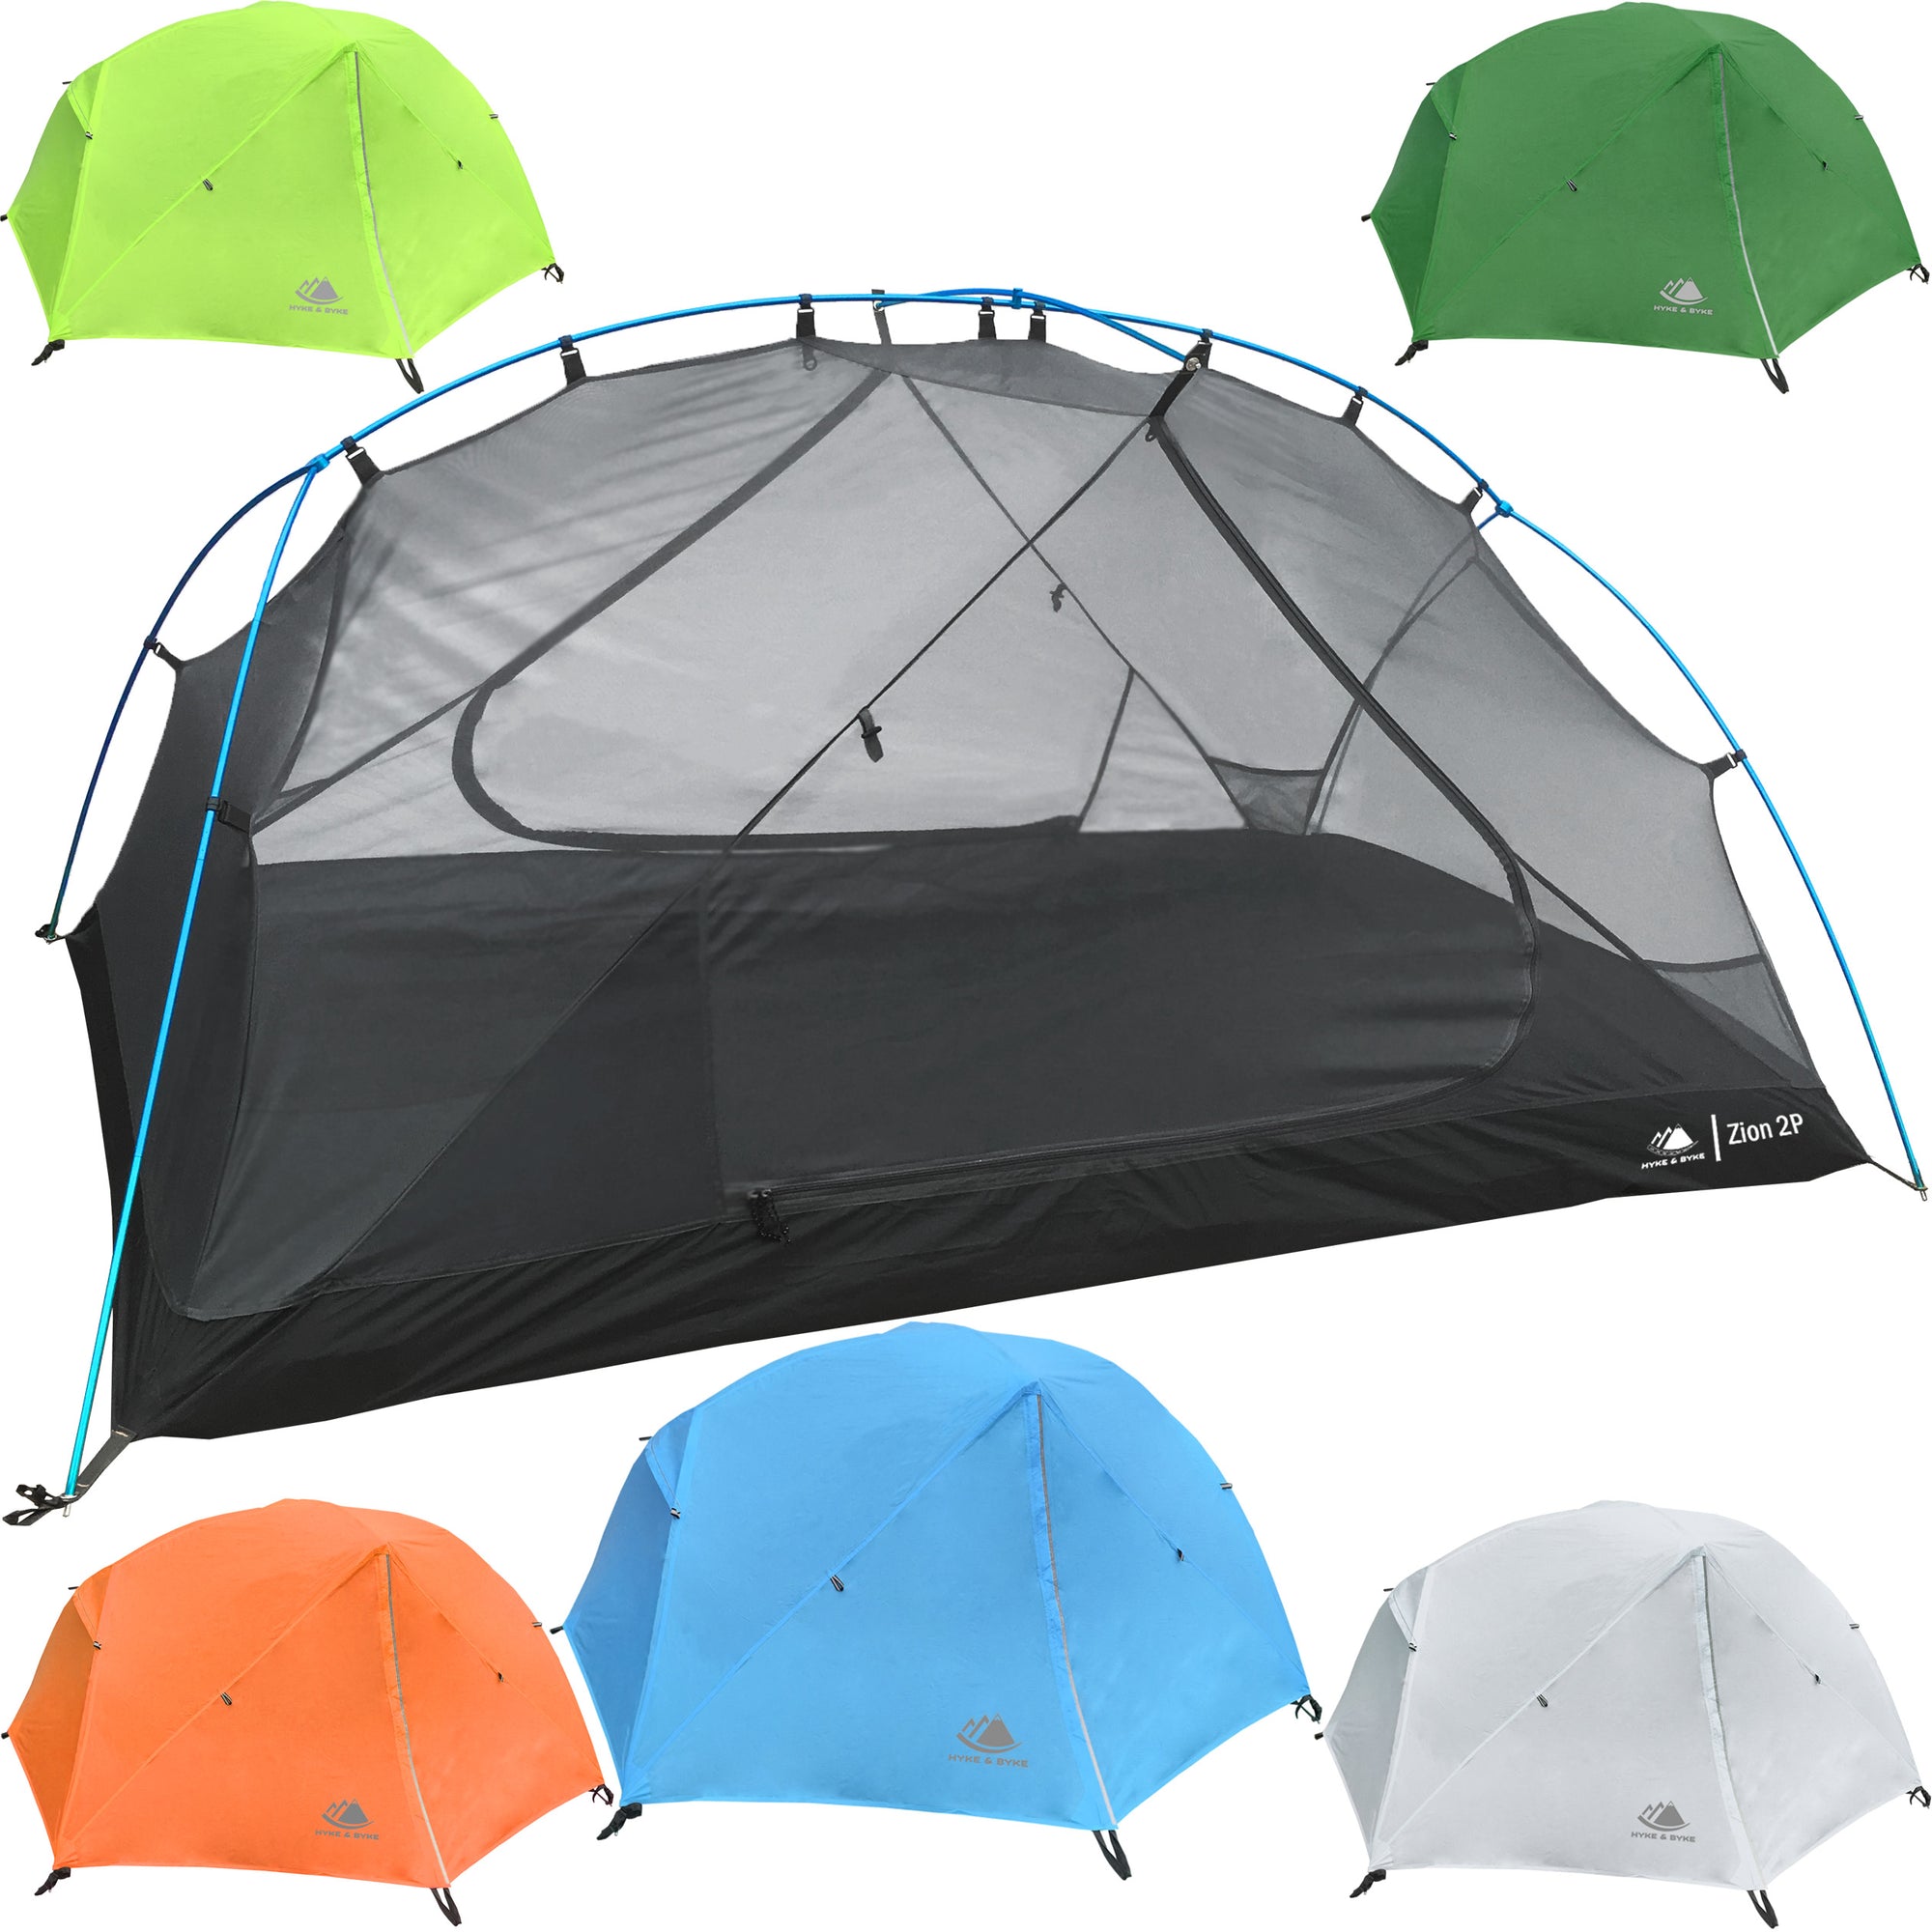 hyke and byke 2 person tent